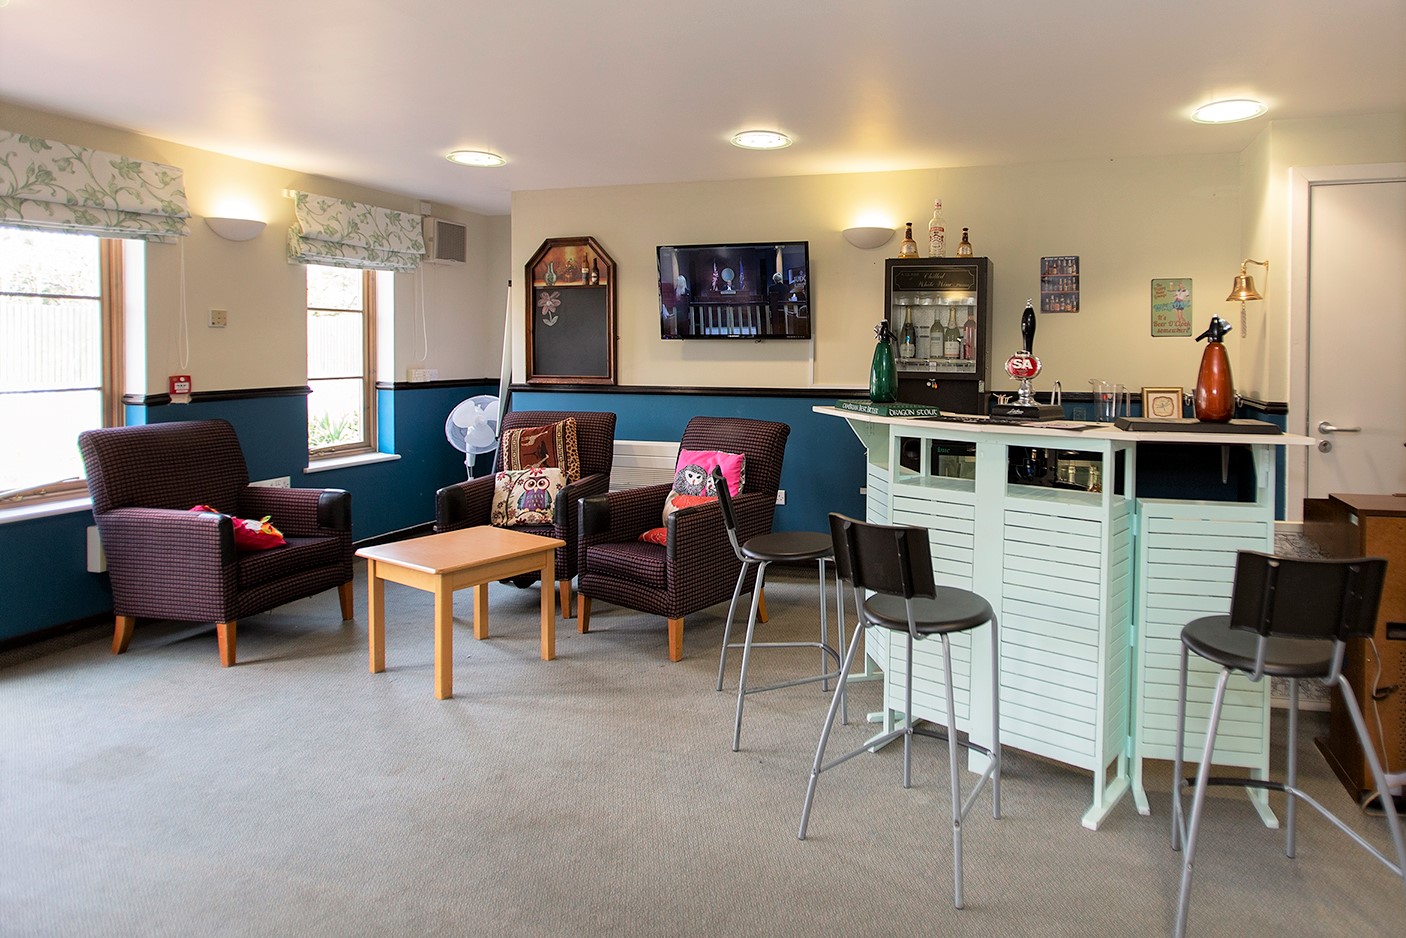 The bar at Brocastle Manor Care Home